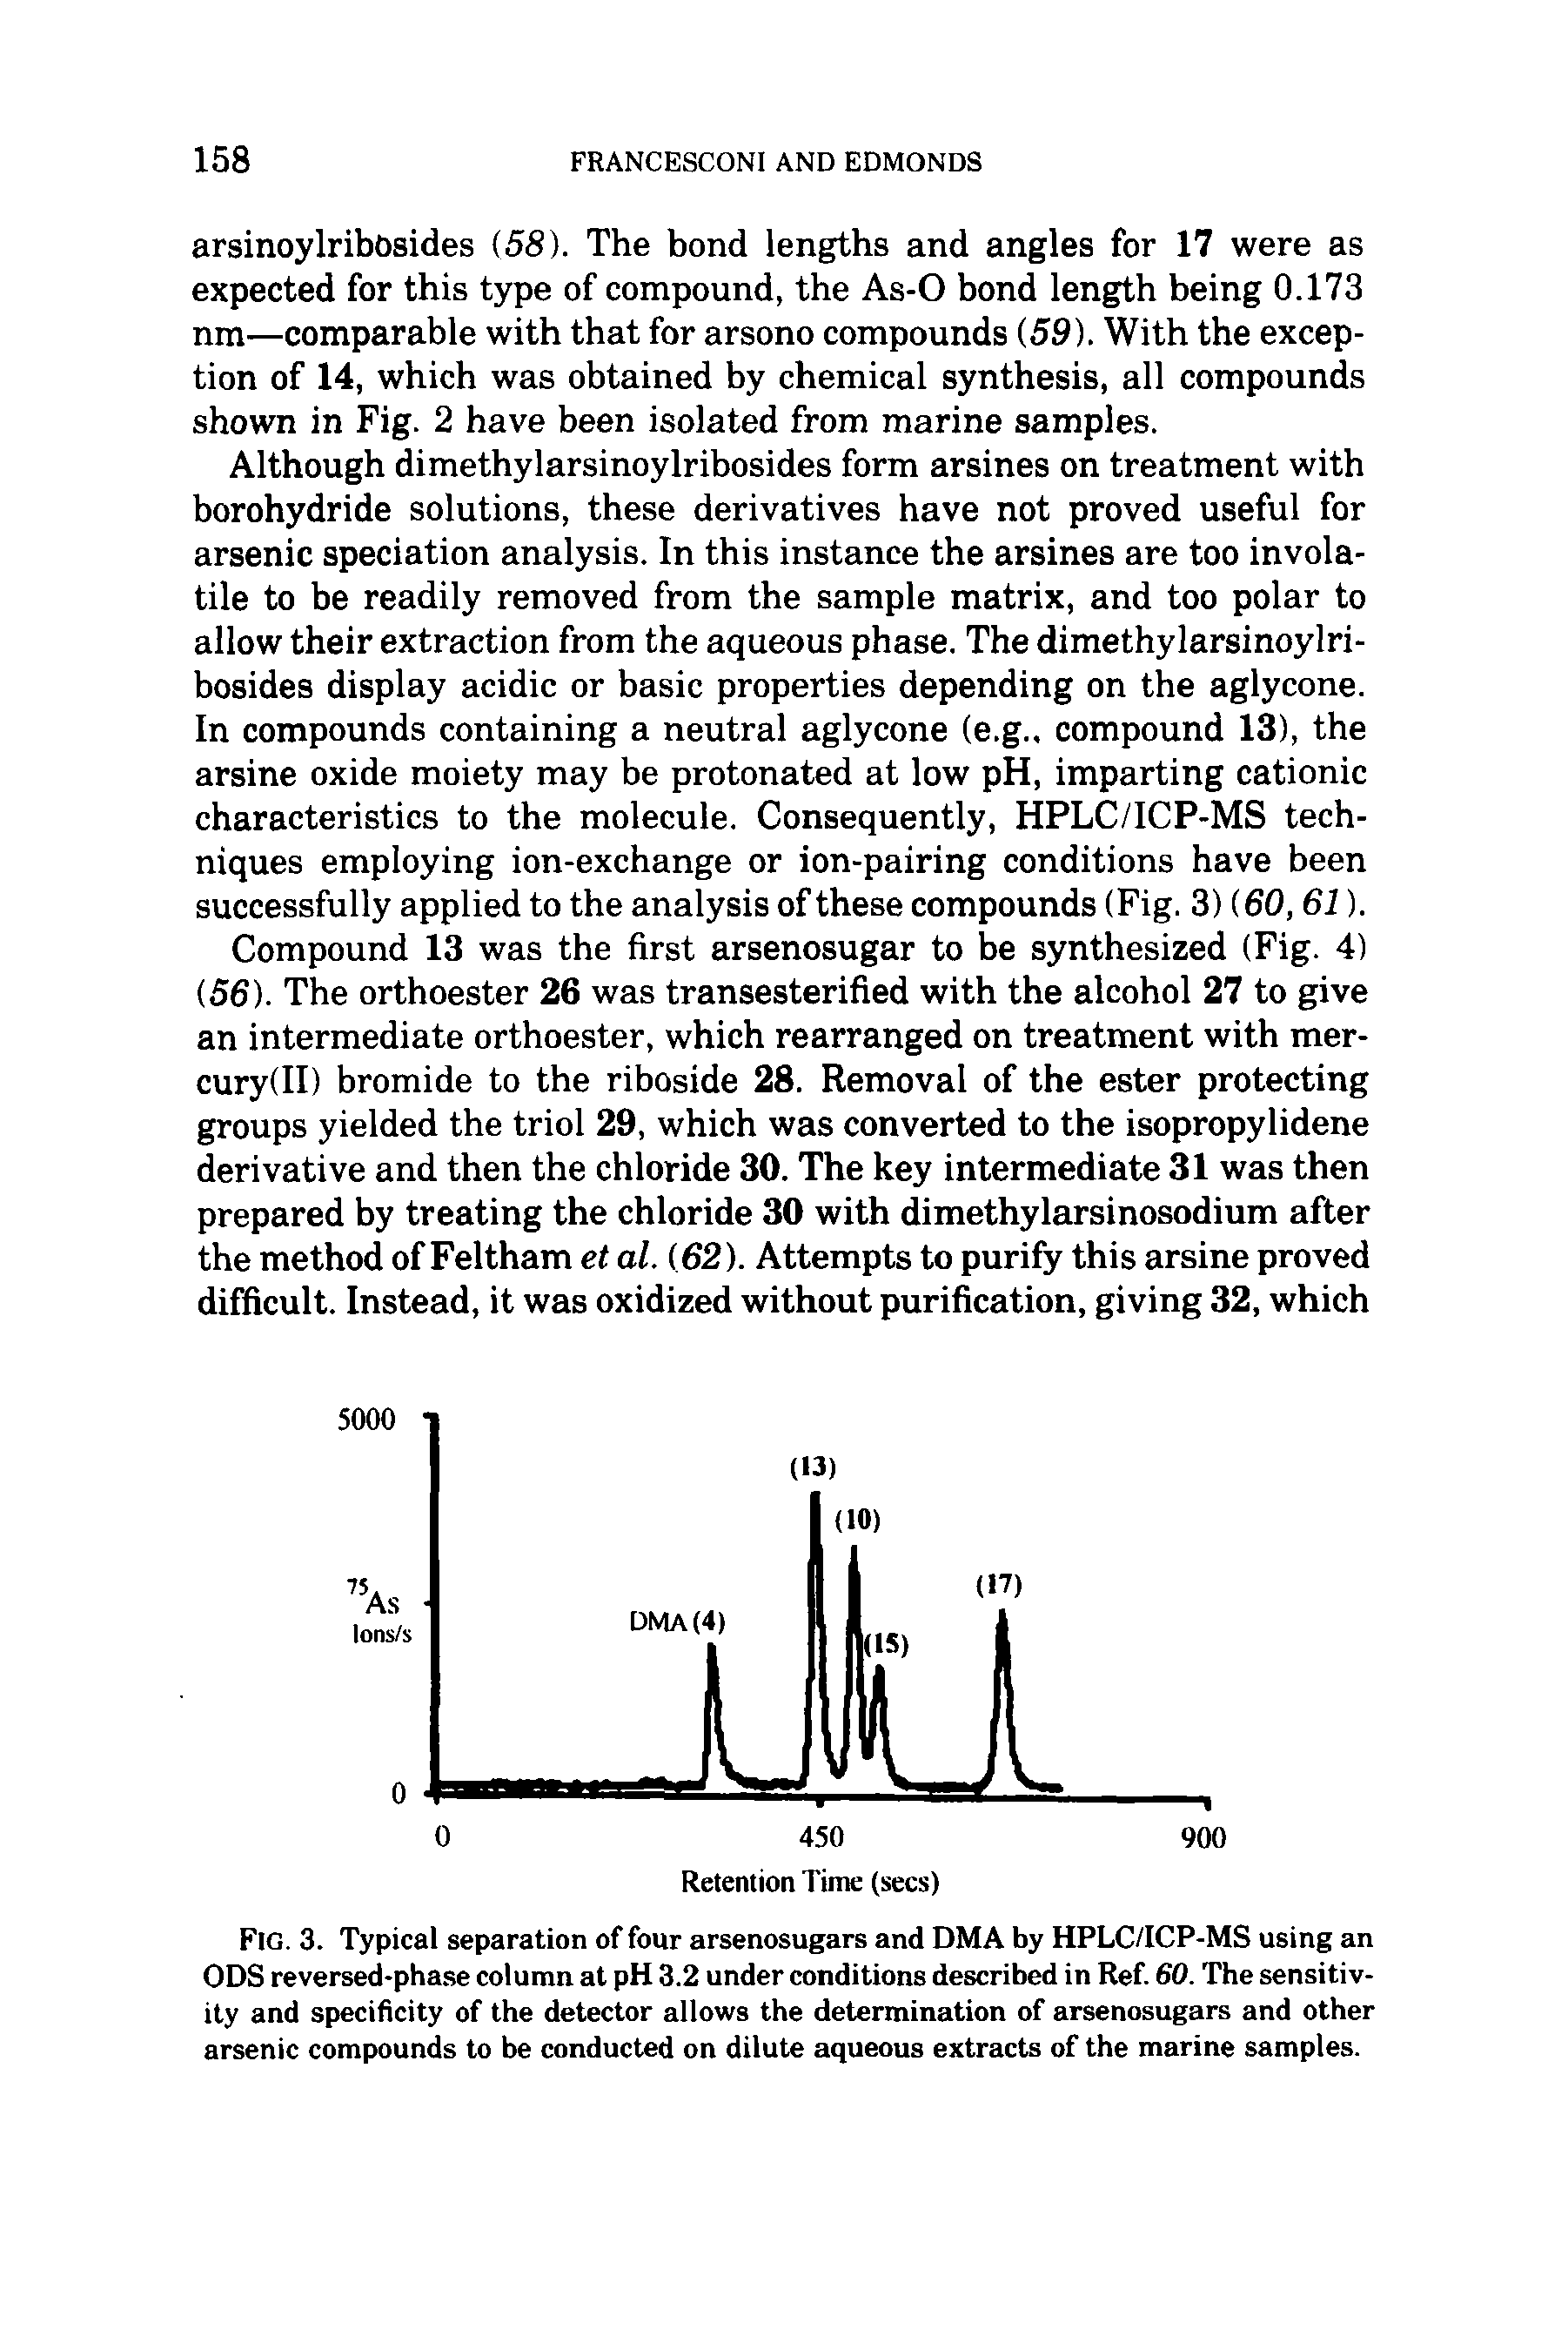 Fig. 3. Typical separation of four arsenosugars and DMA by HPLC/ICP-MS using an ODS reversed-phase column at pH 3.2 under conditions described in Ref. 60. The sensitivity and specificity of the detector allows the determination of arsenosugars and other arsenic compounds to be conducted on dilute aqueous extracts of the marine samples.